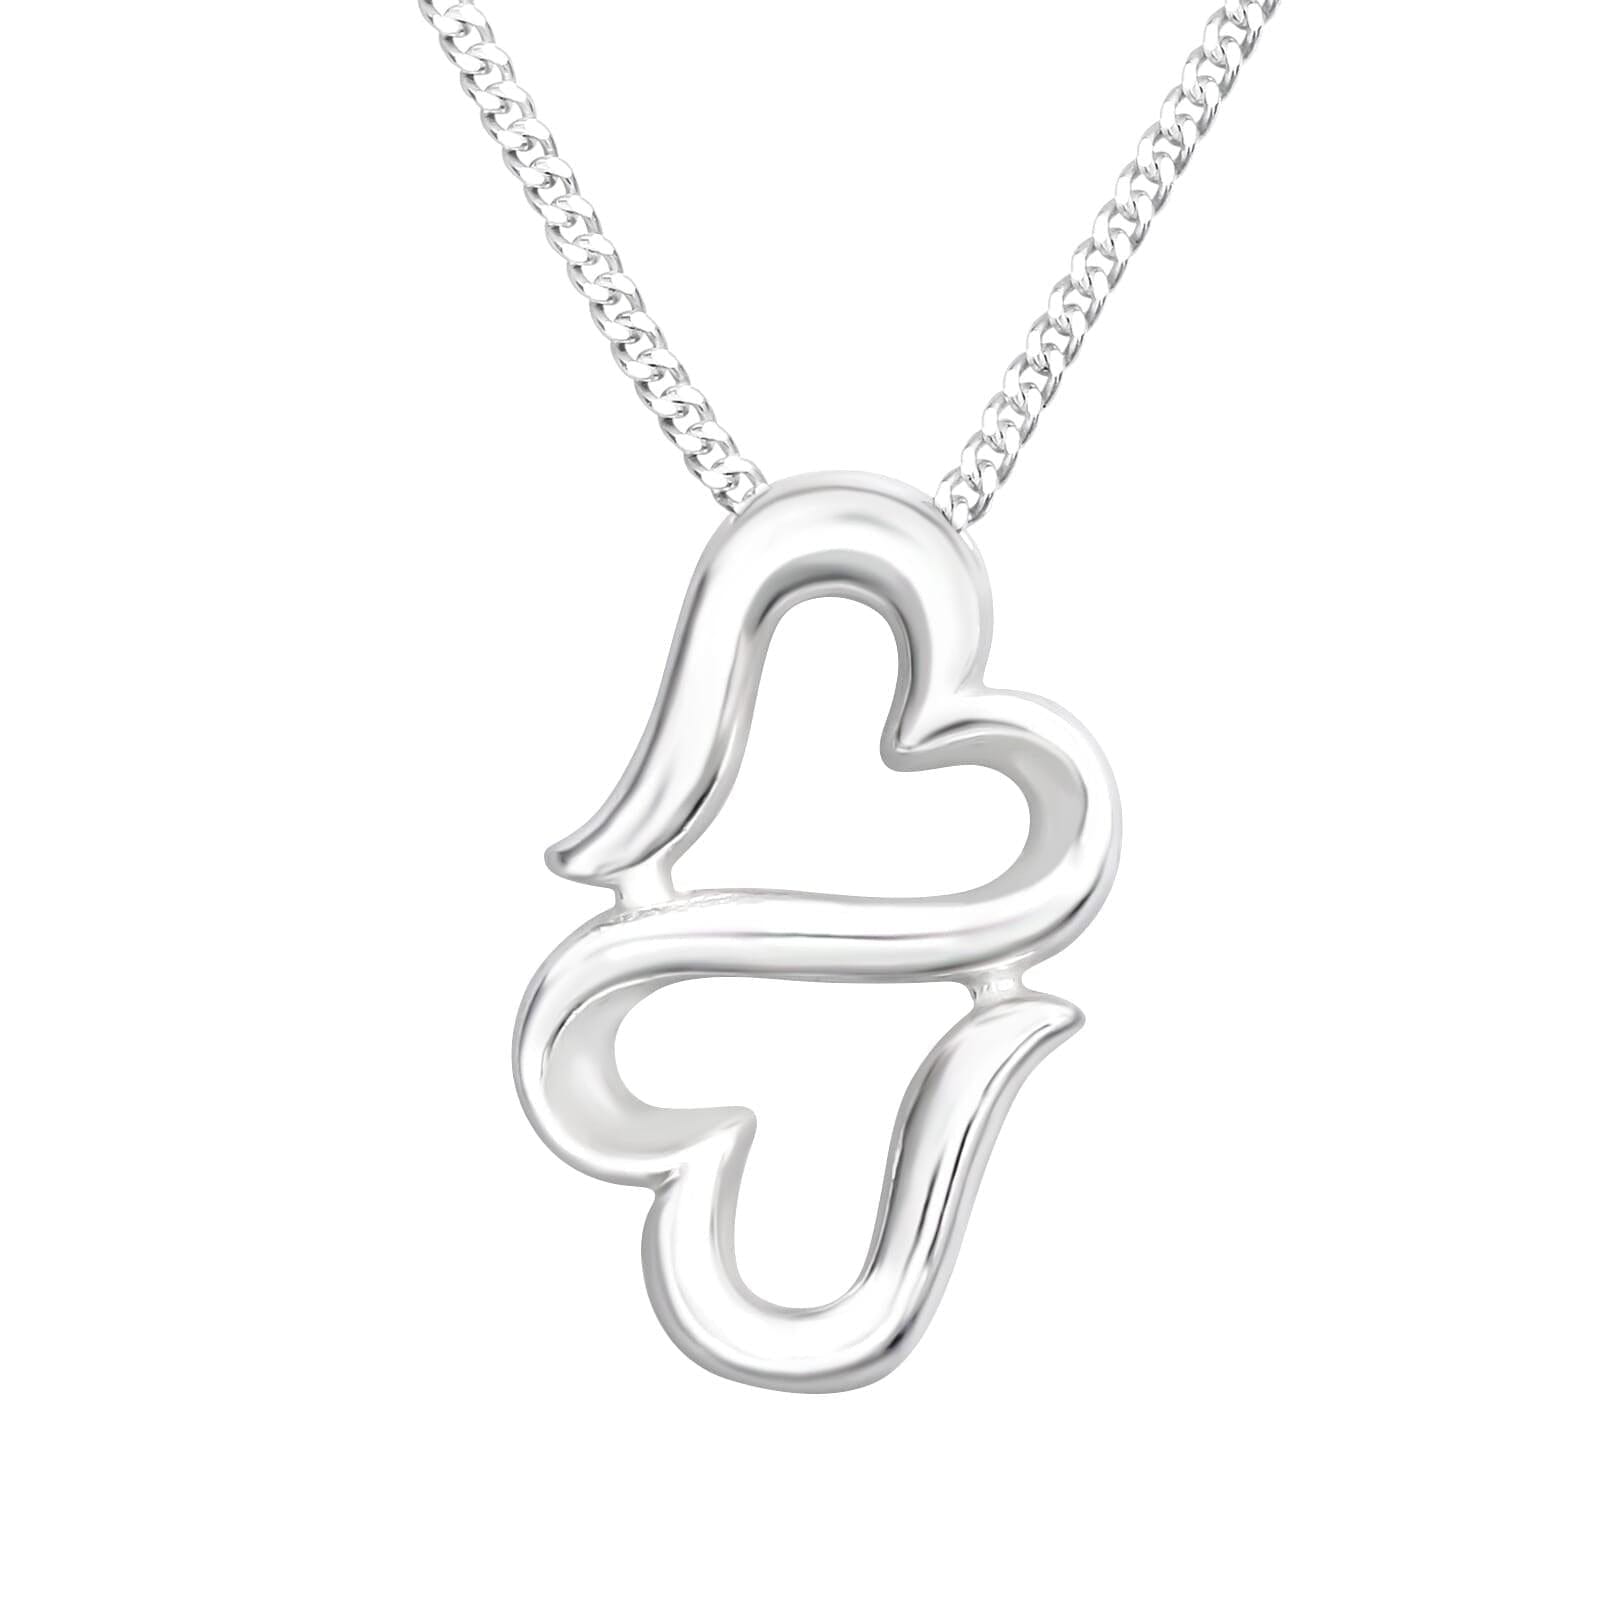 Asfour 925 Sterling Silver Necklace, Silver